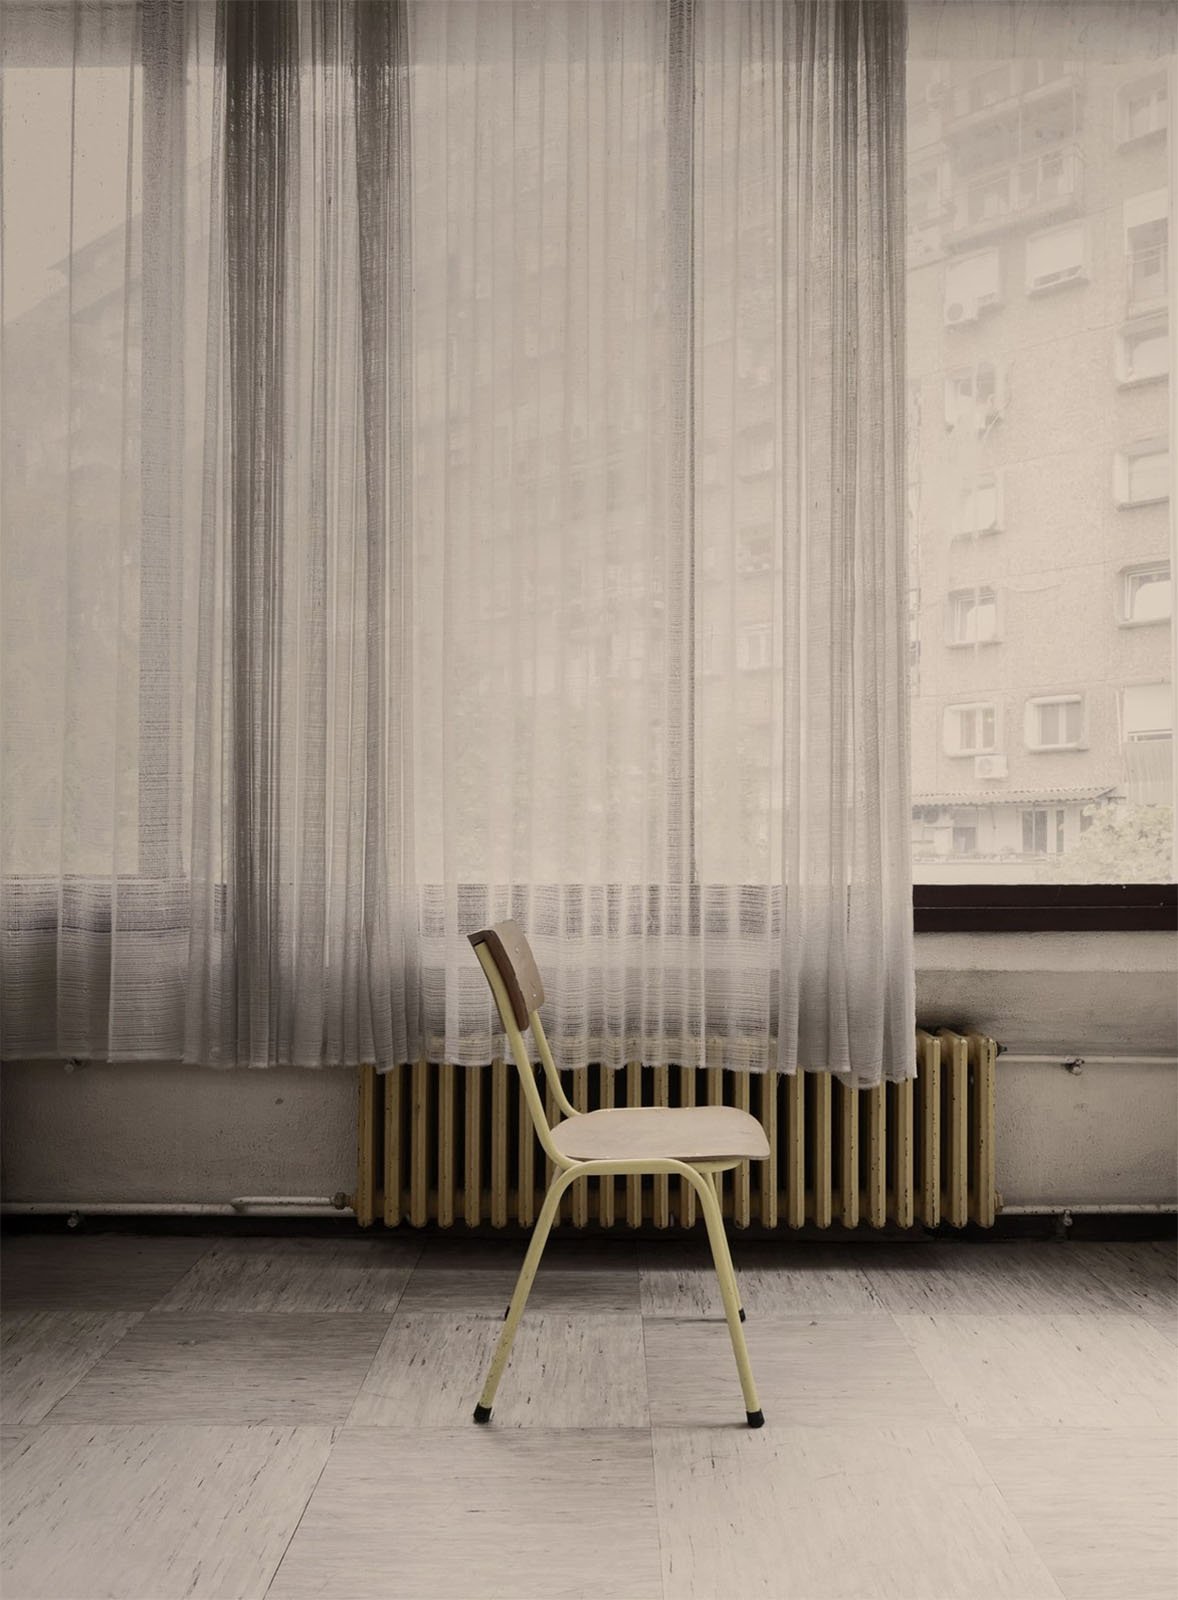 A single vintage chair stands in front of a window draped with sheer curtains, overlooking a cityscape, emphasizing a quiet, melancholic atmosphere in a room with a wooden floor.